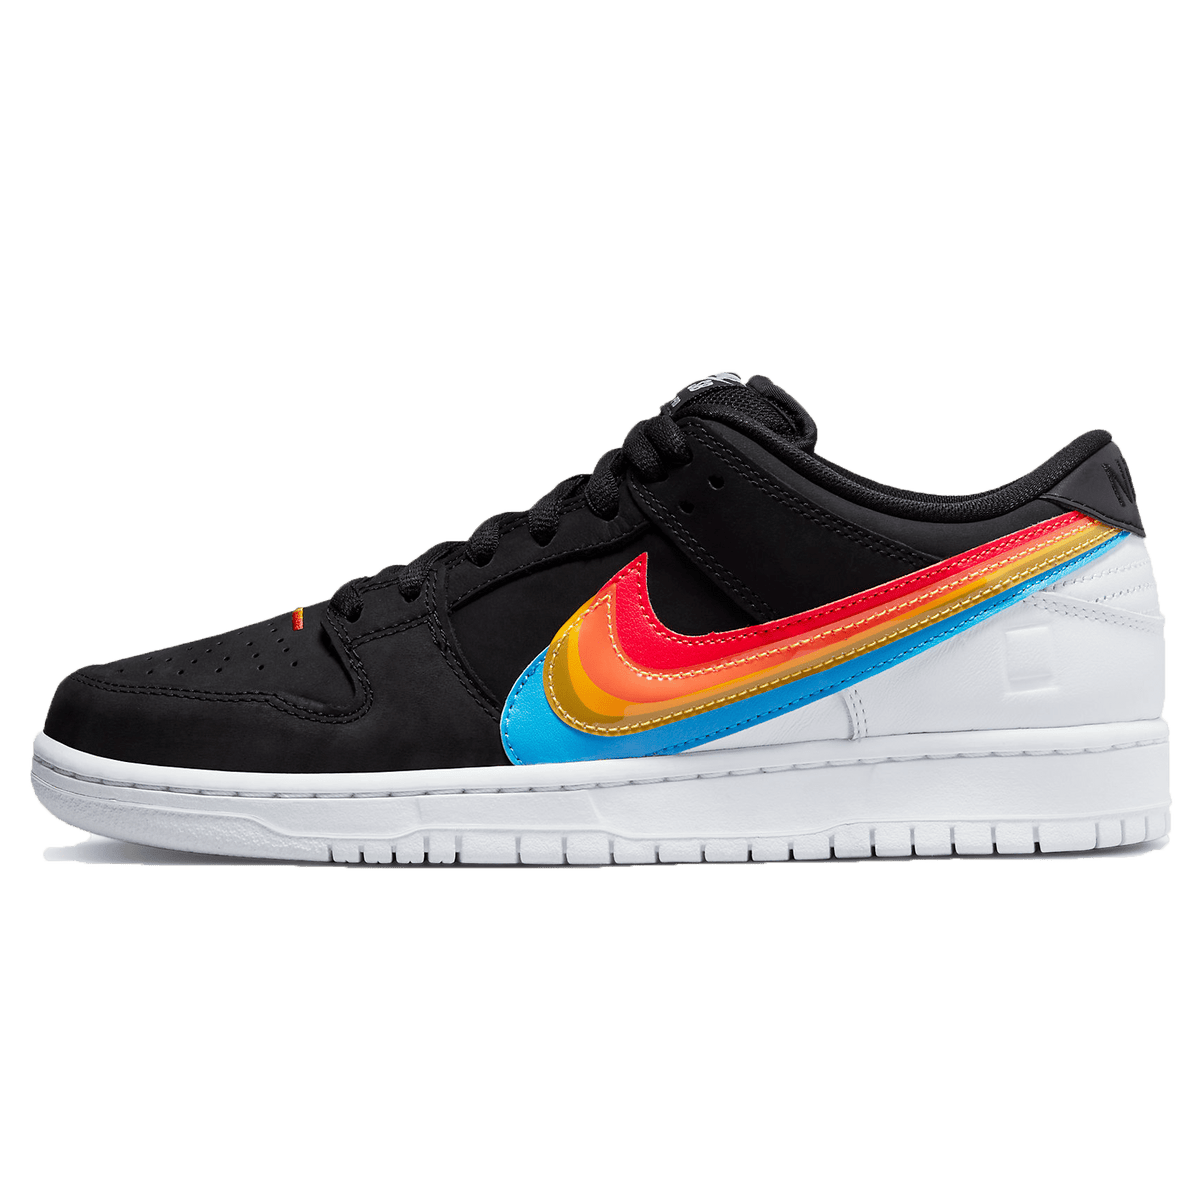 nike dunk low obsidian grey canvas shoes for women - CerbeShops